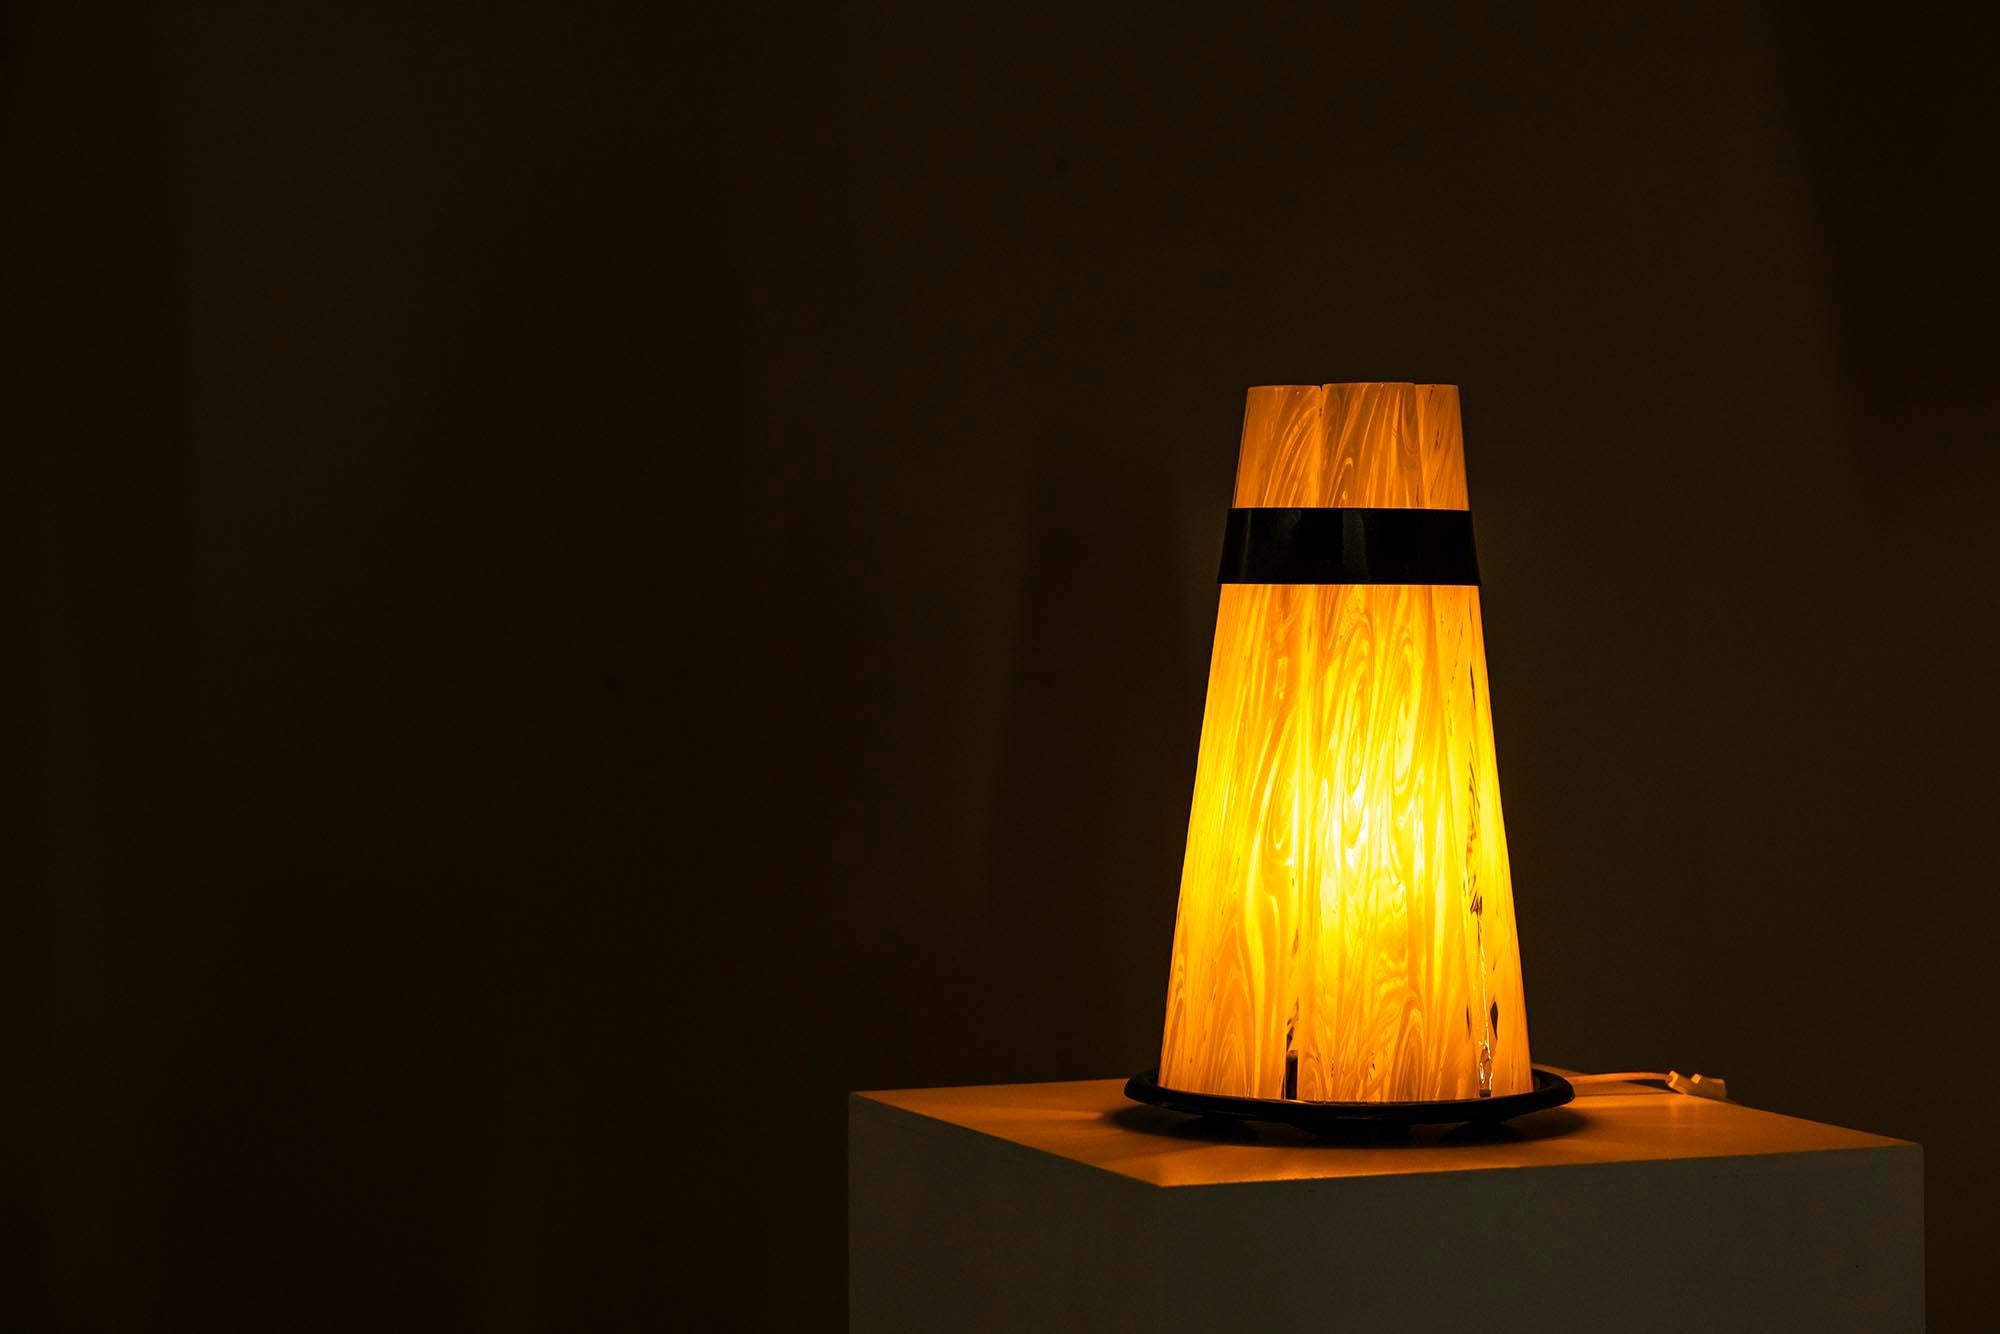 Mid-Century Modern Table Lamp “Bricola” In Murano By Federica Marangoni For ITRE, Italy 1975